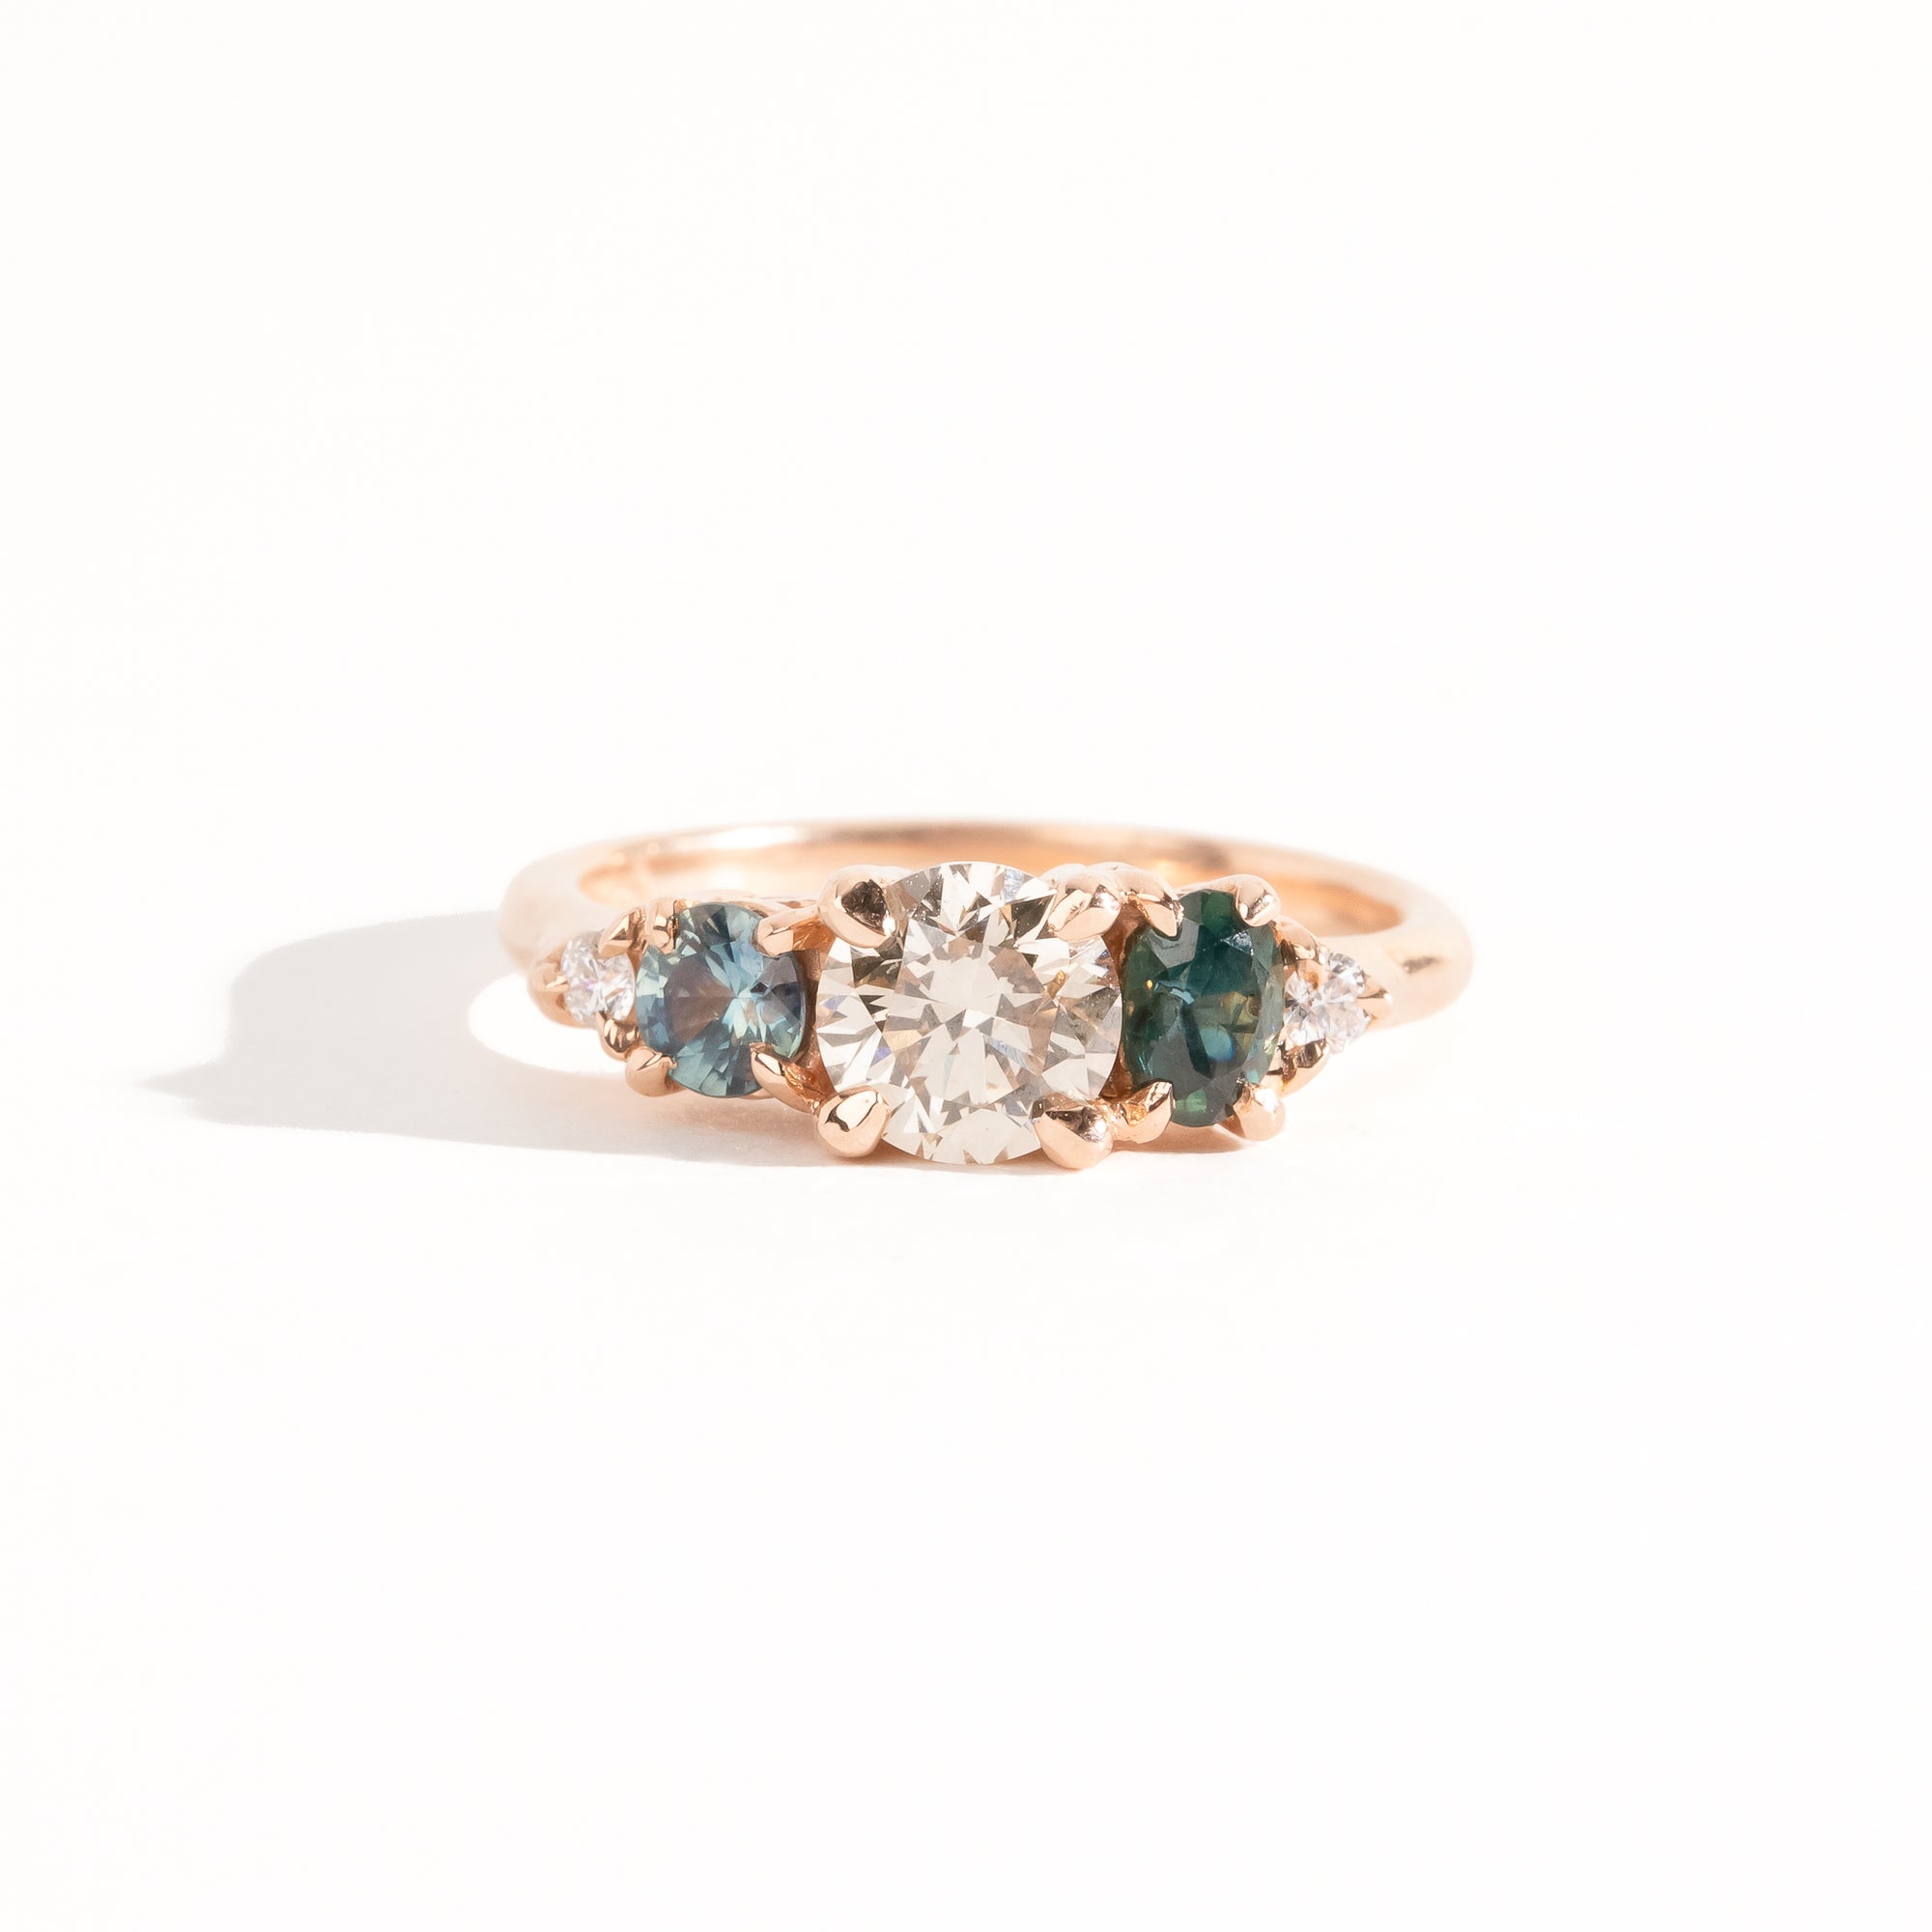 Handmade, bespoke Diamond and ethically sourced Australian sapphire five stone cluster ring in 14ct recycled refined rose gold